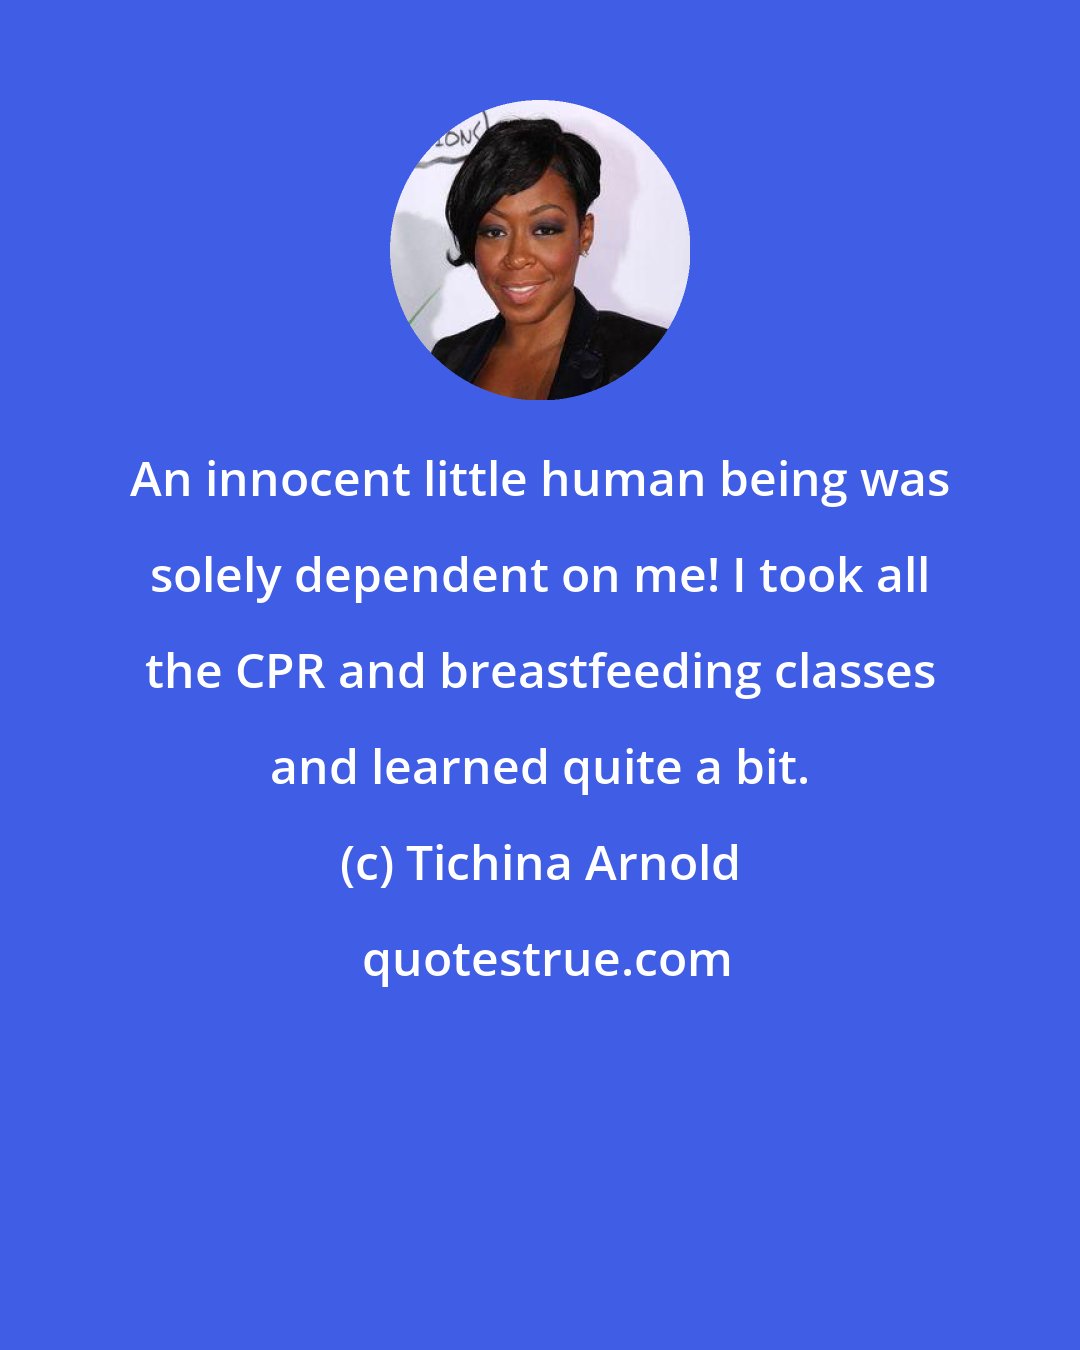 Tichina Arnold: An innocent little human being was solely dependent on me! I took all the CPR and breastfeeding classes and learned quite a bit.